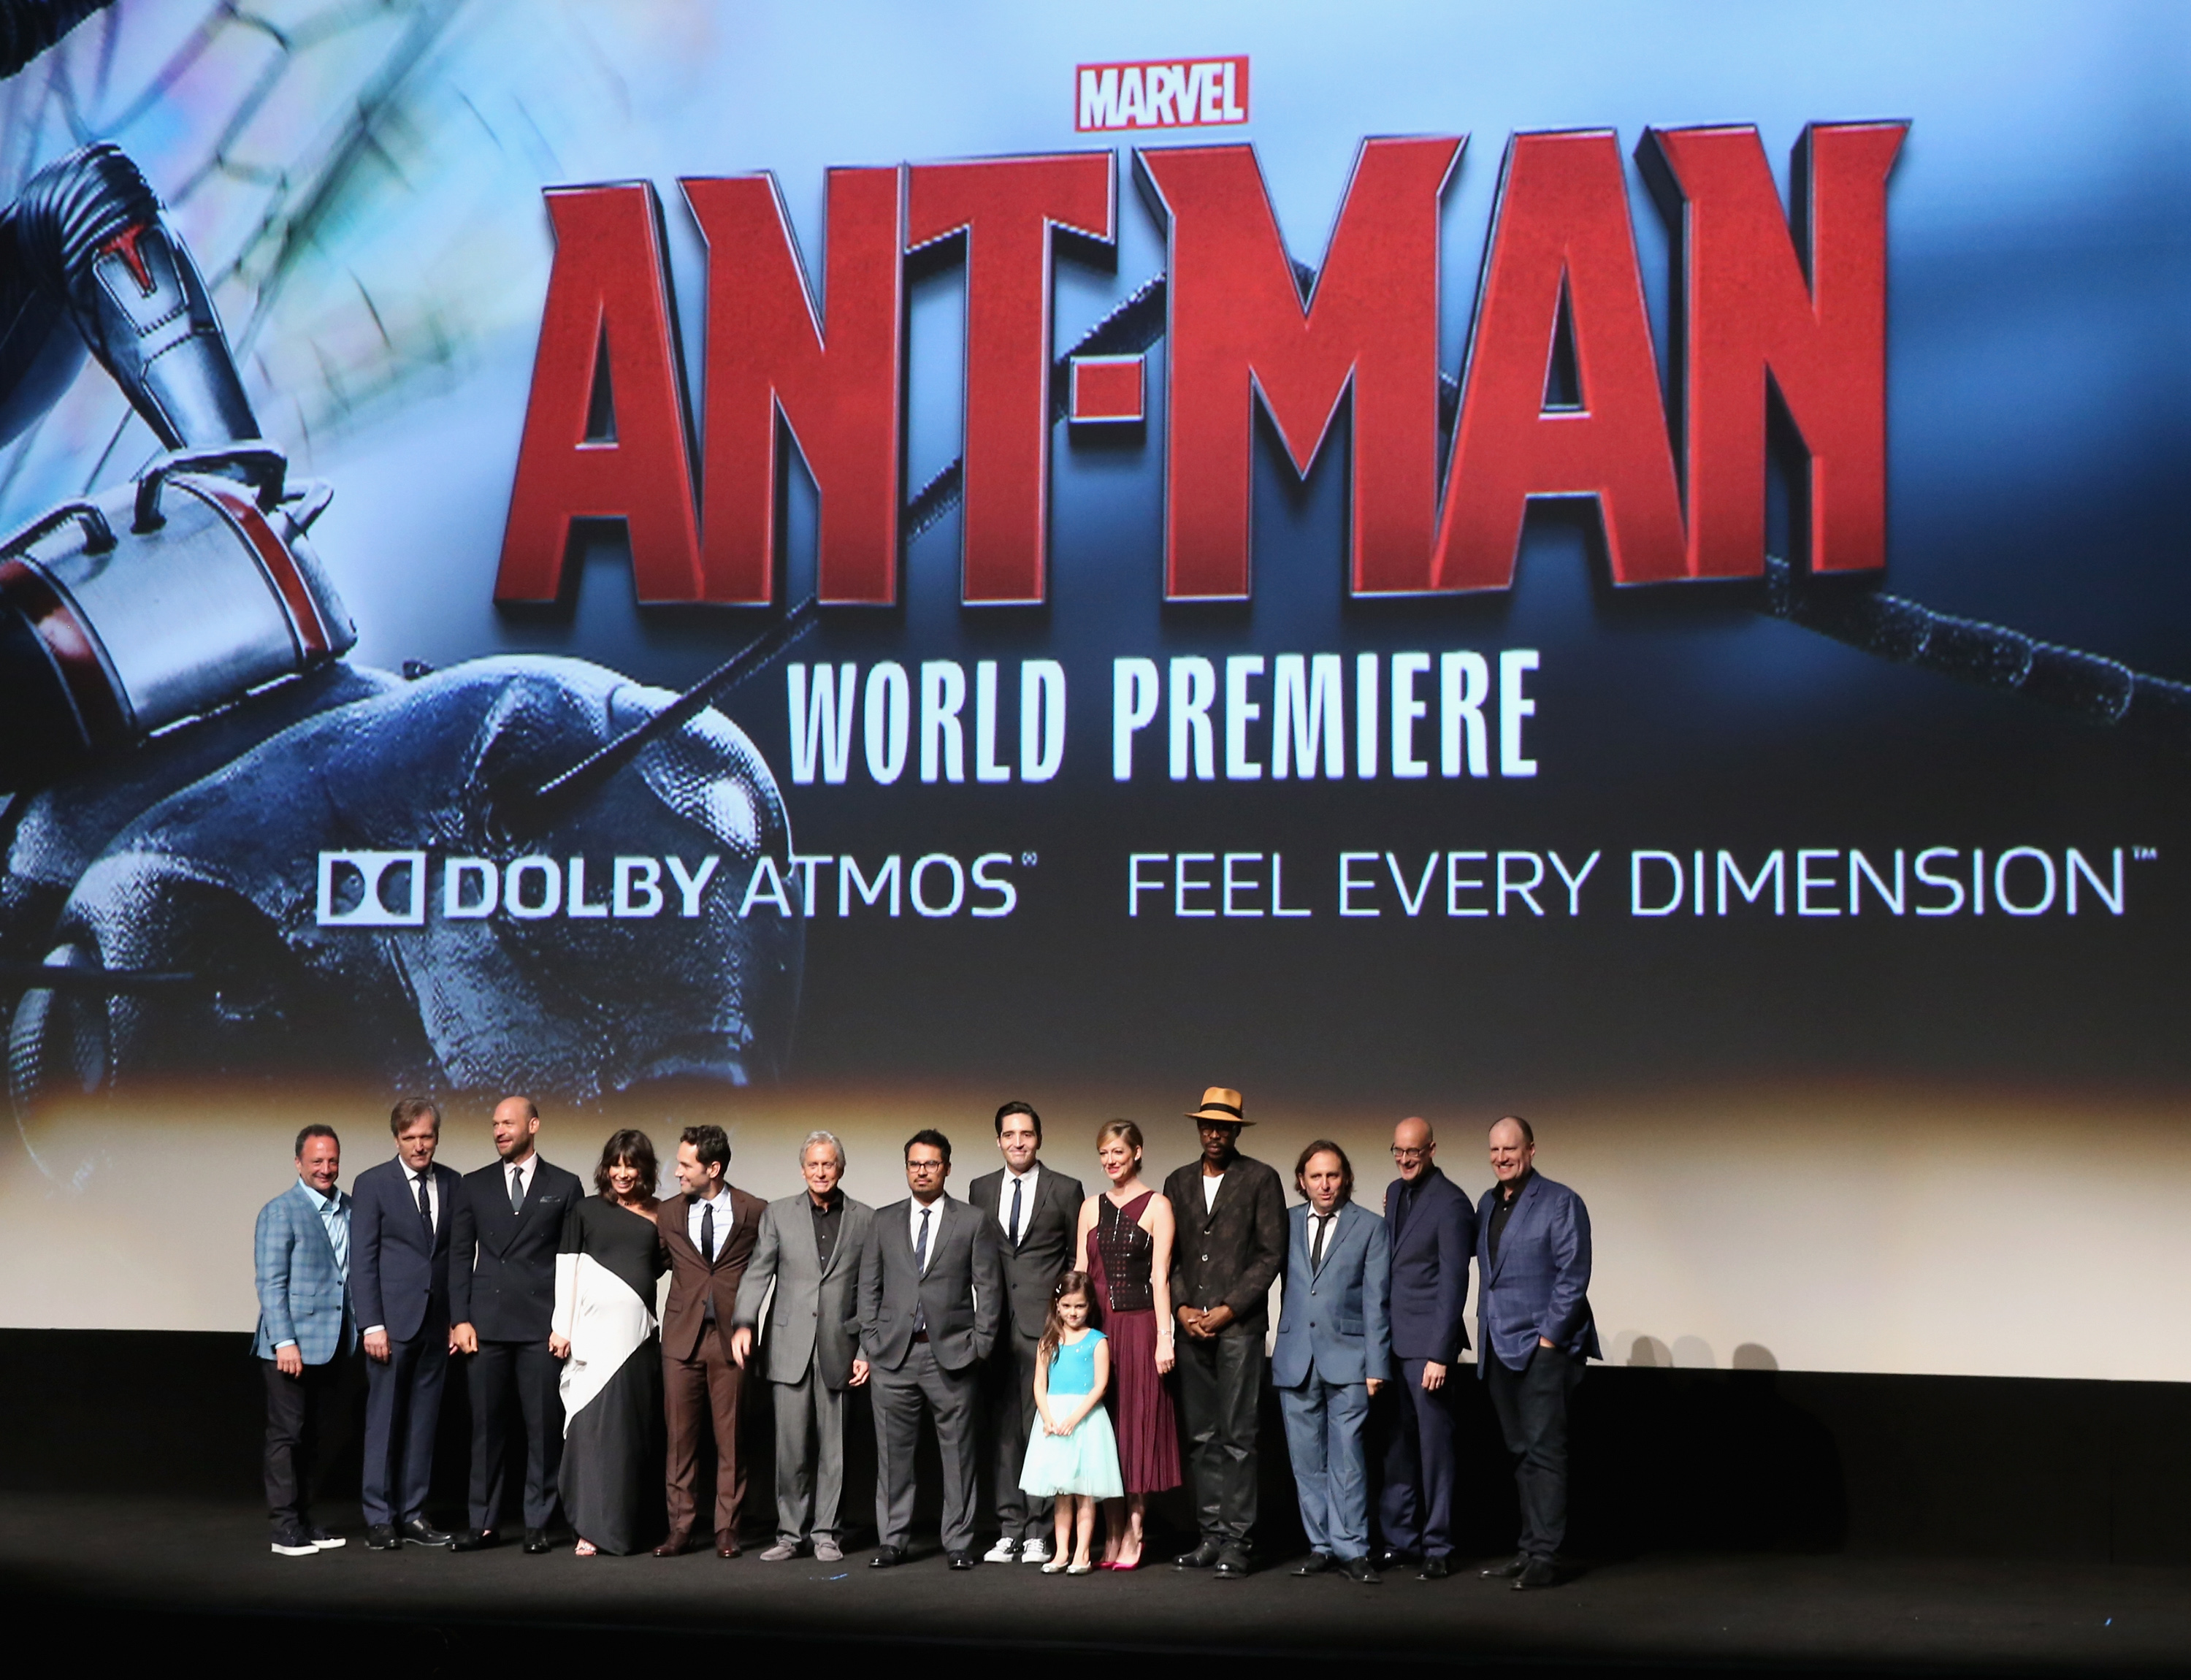 A Look at the World Premiere of Marvel’s Ant-Man